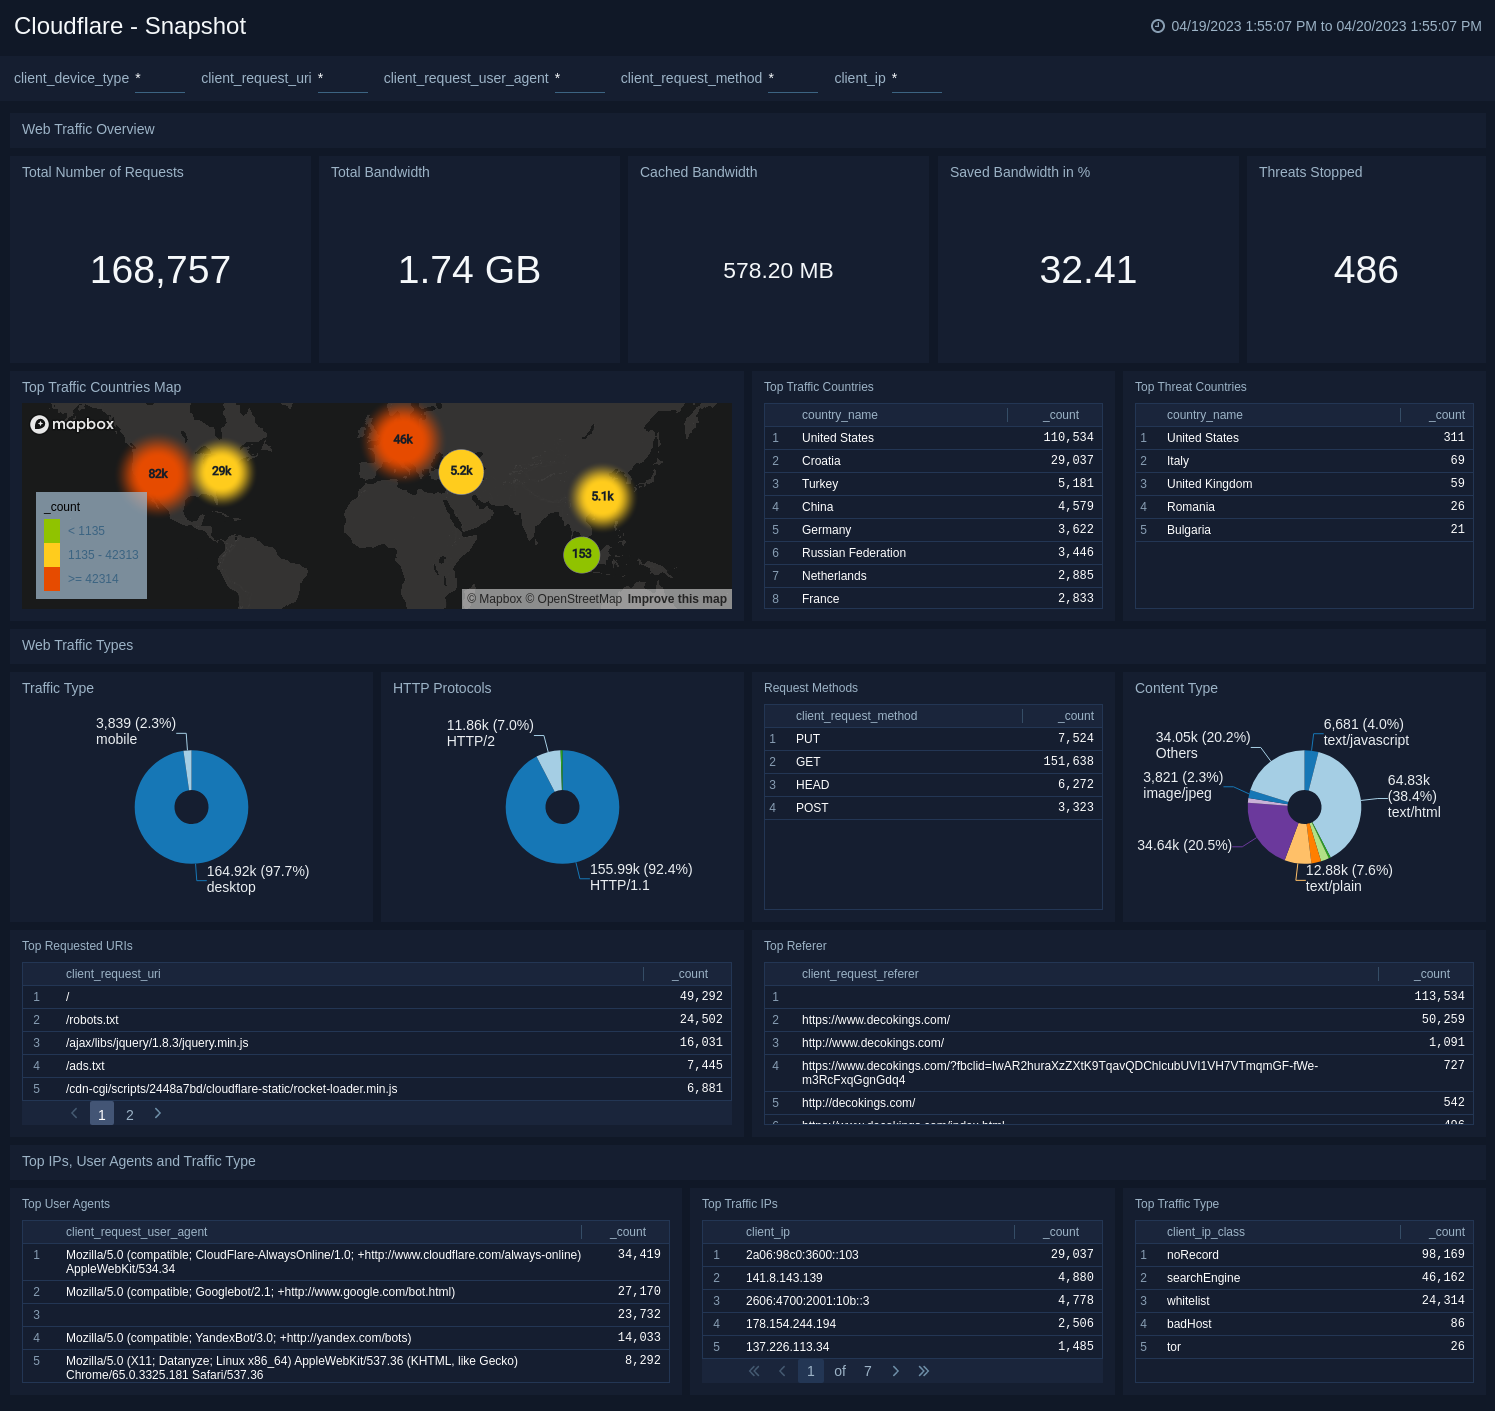 Cloudflare dashboards